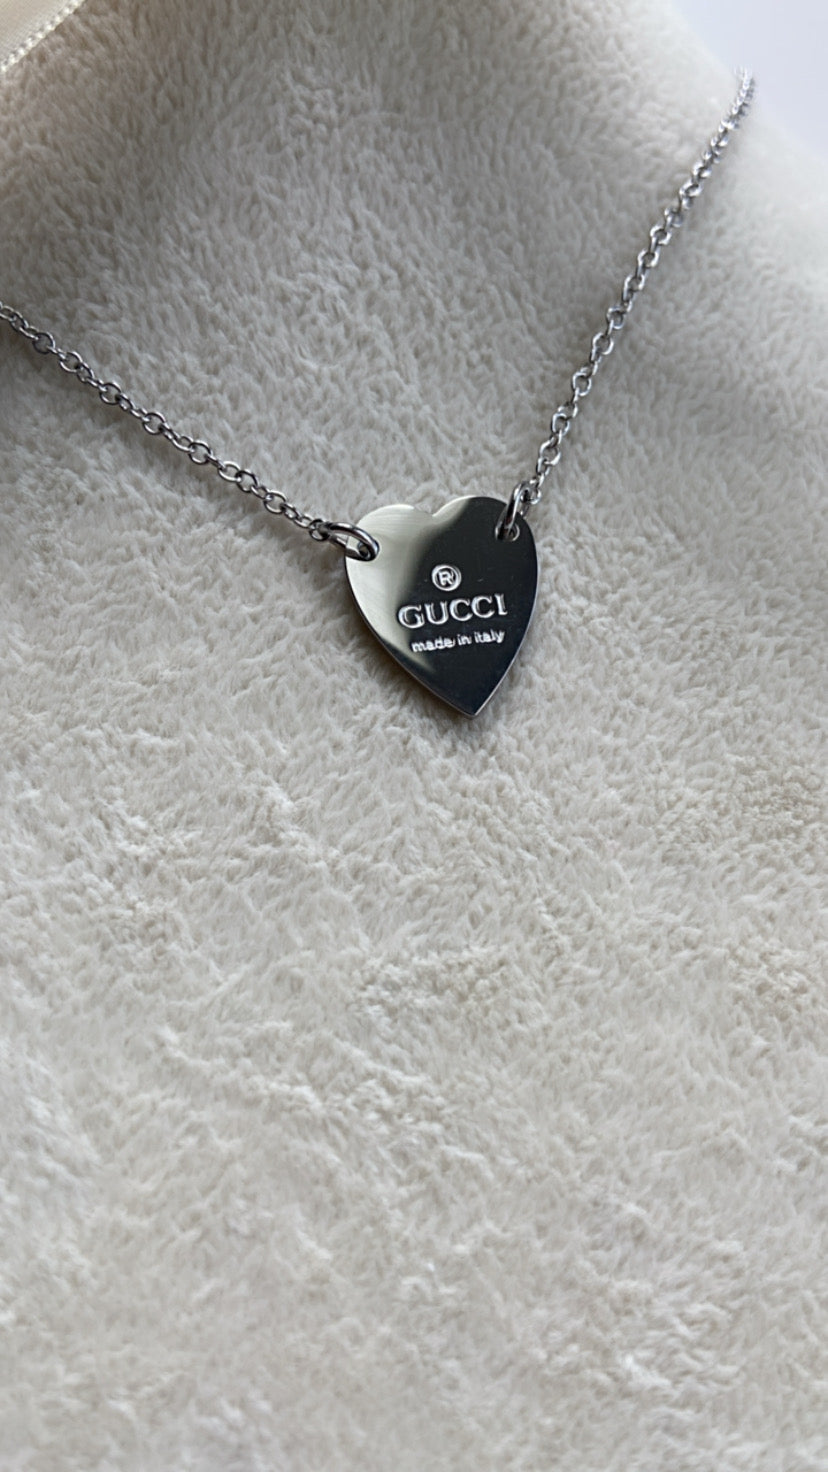 GG HEART NECKLACE (BUY A NECKLACE AND GET BRACELET FREE)